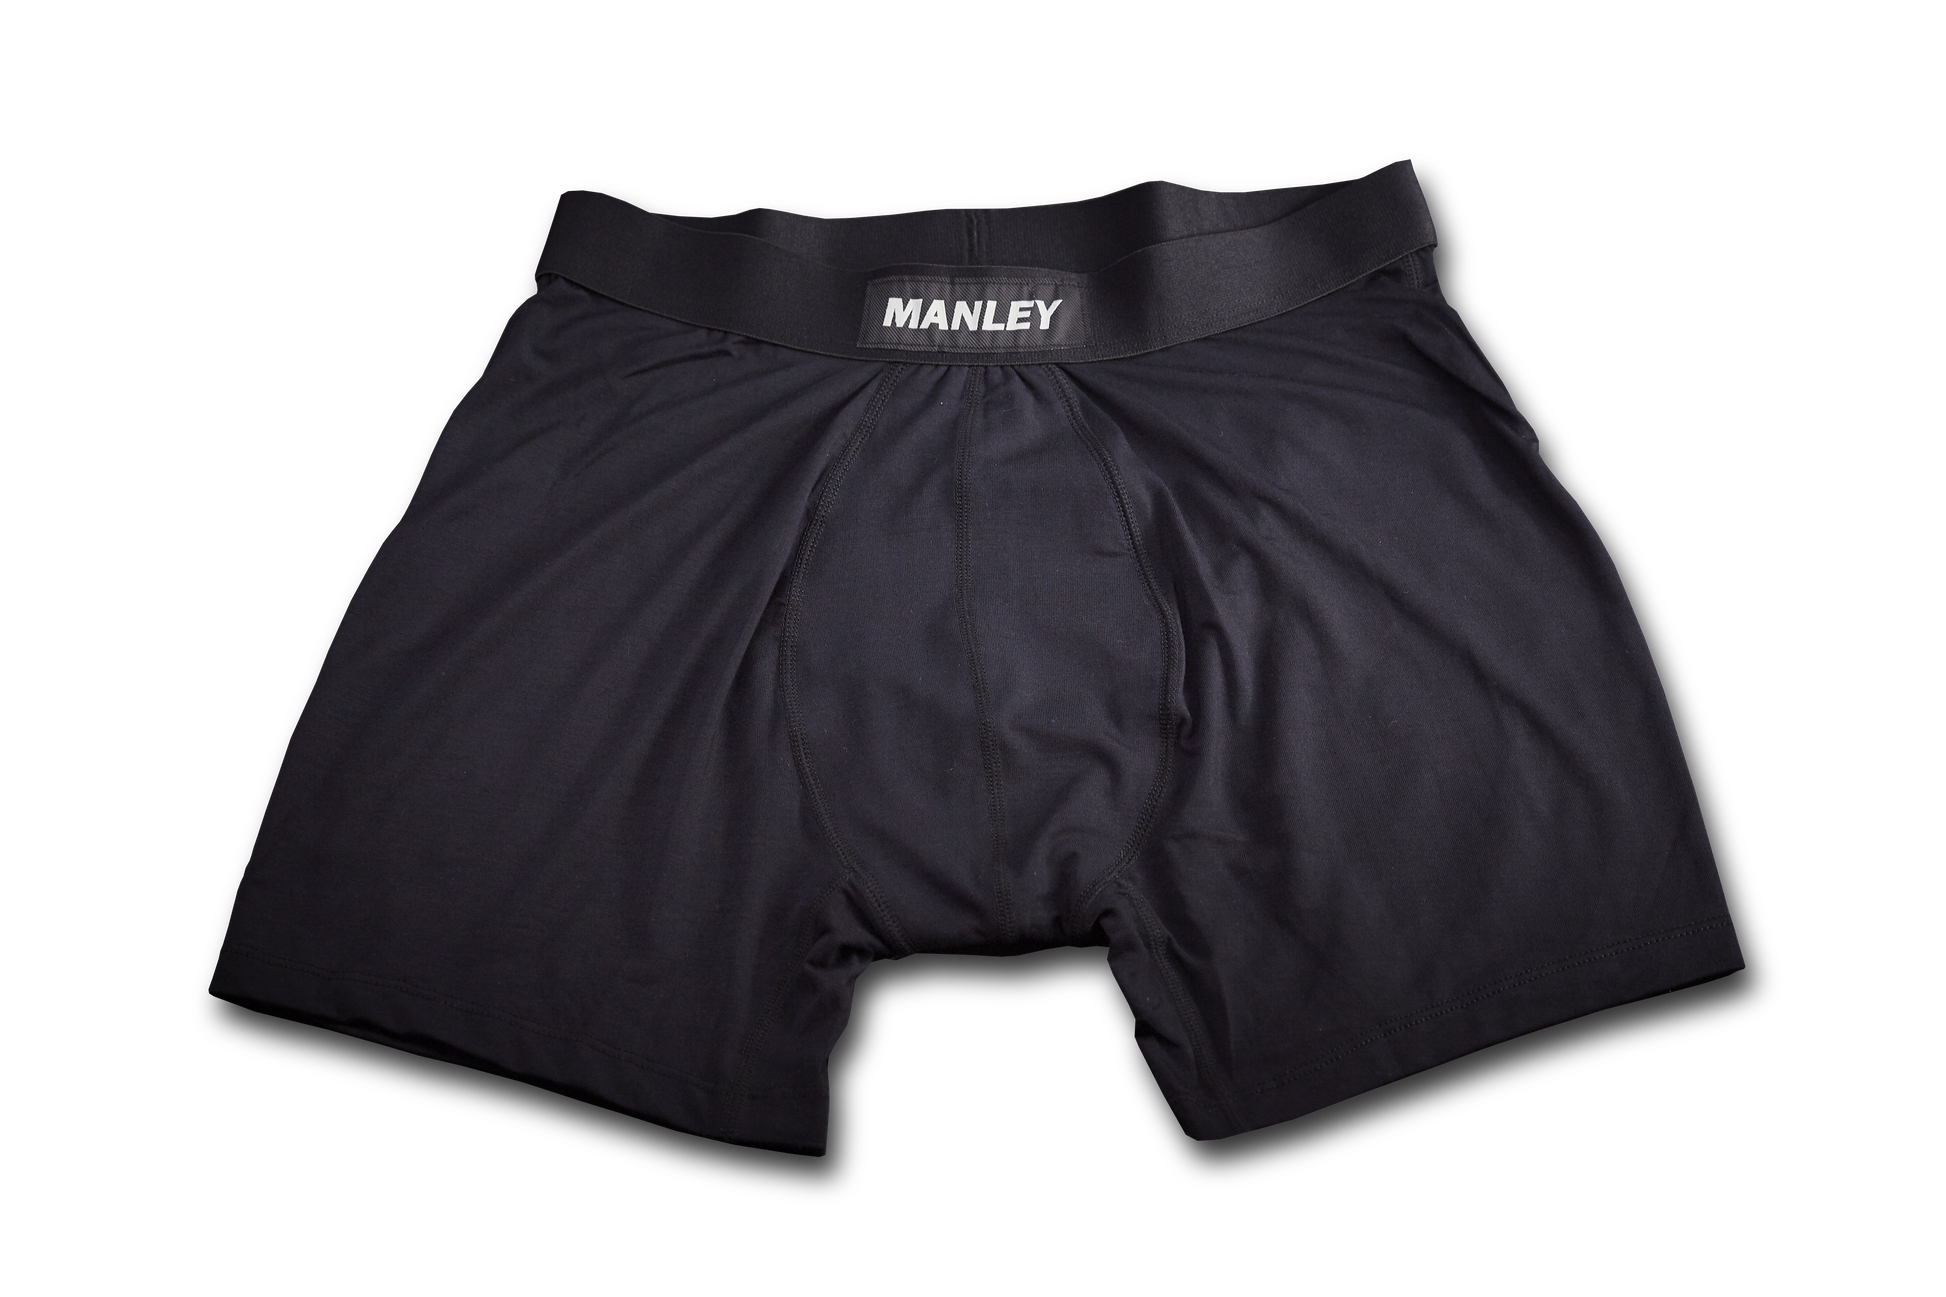 Underwear that Stops the Pee Spot  Well Red – Manley Barrier Apparel